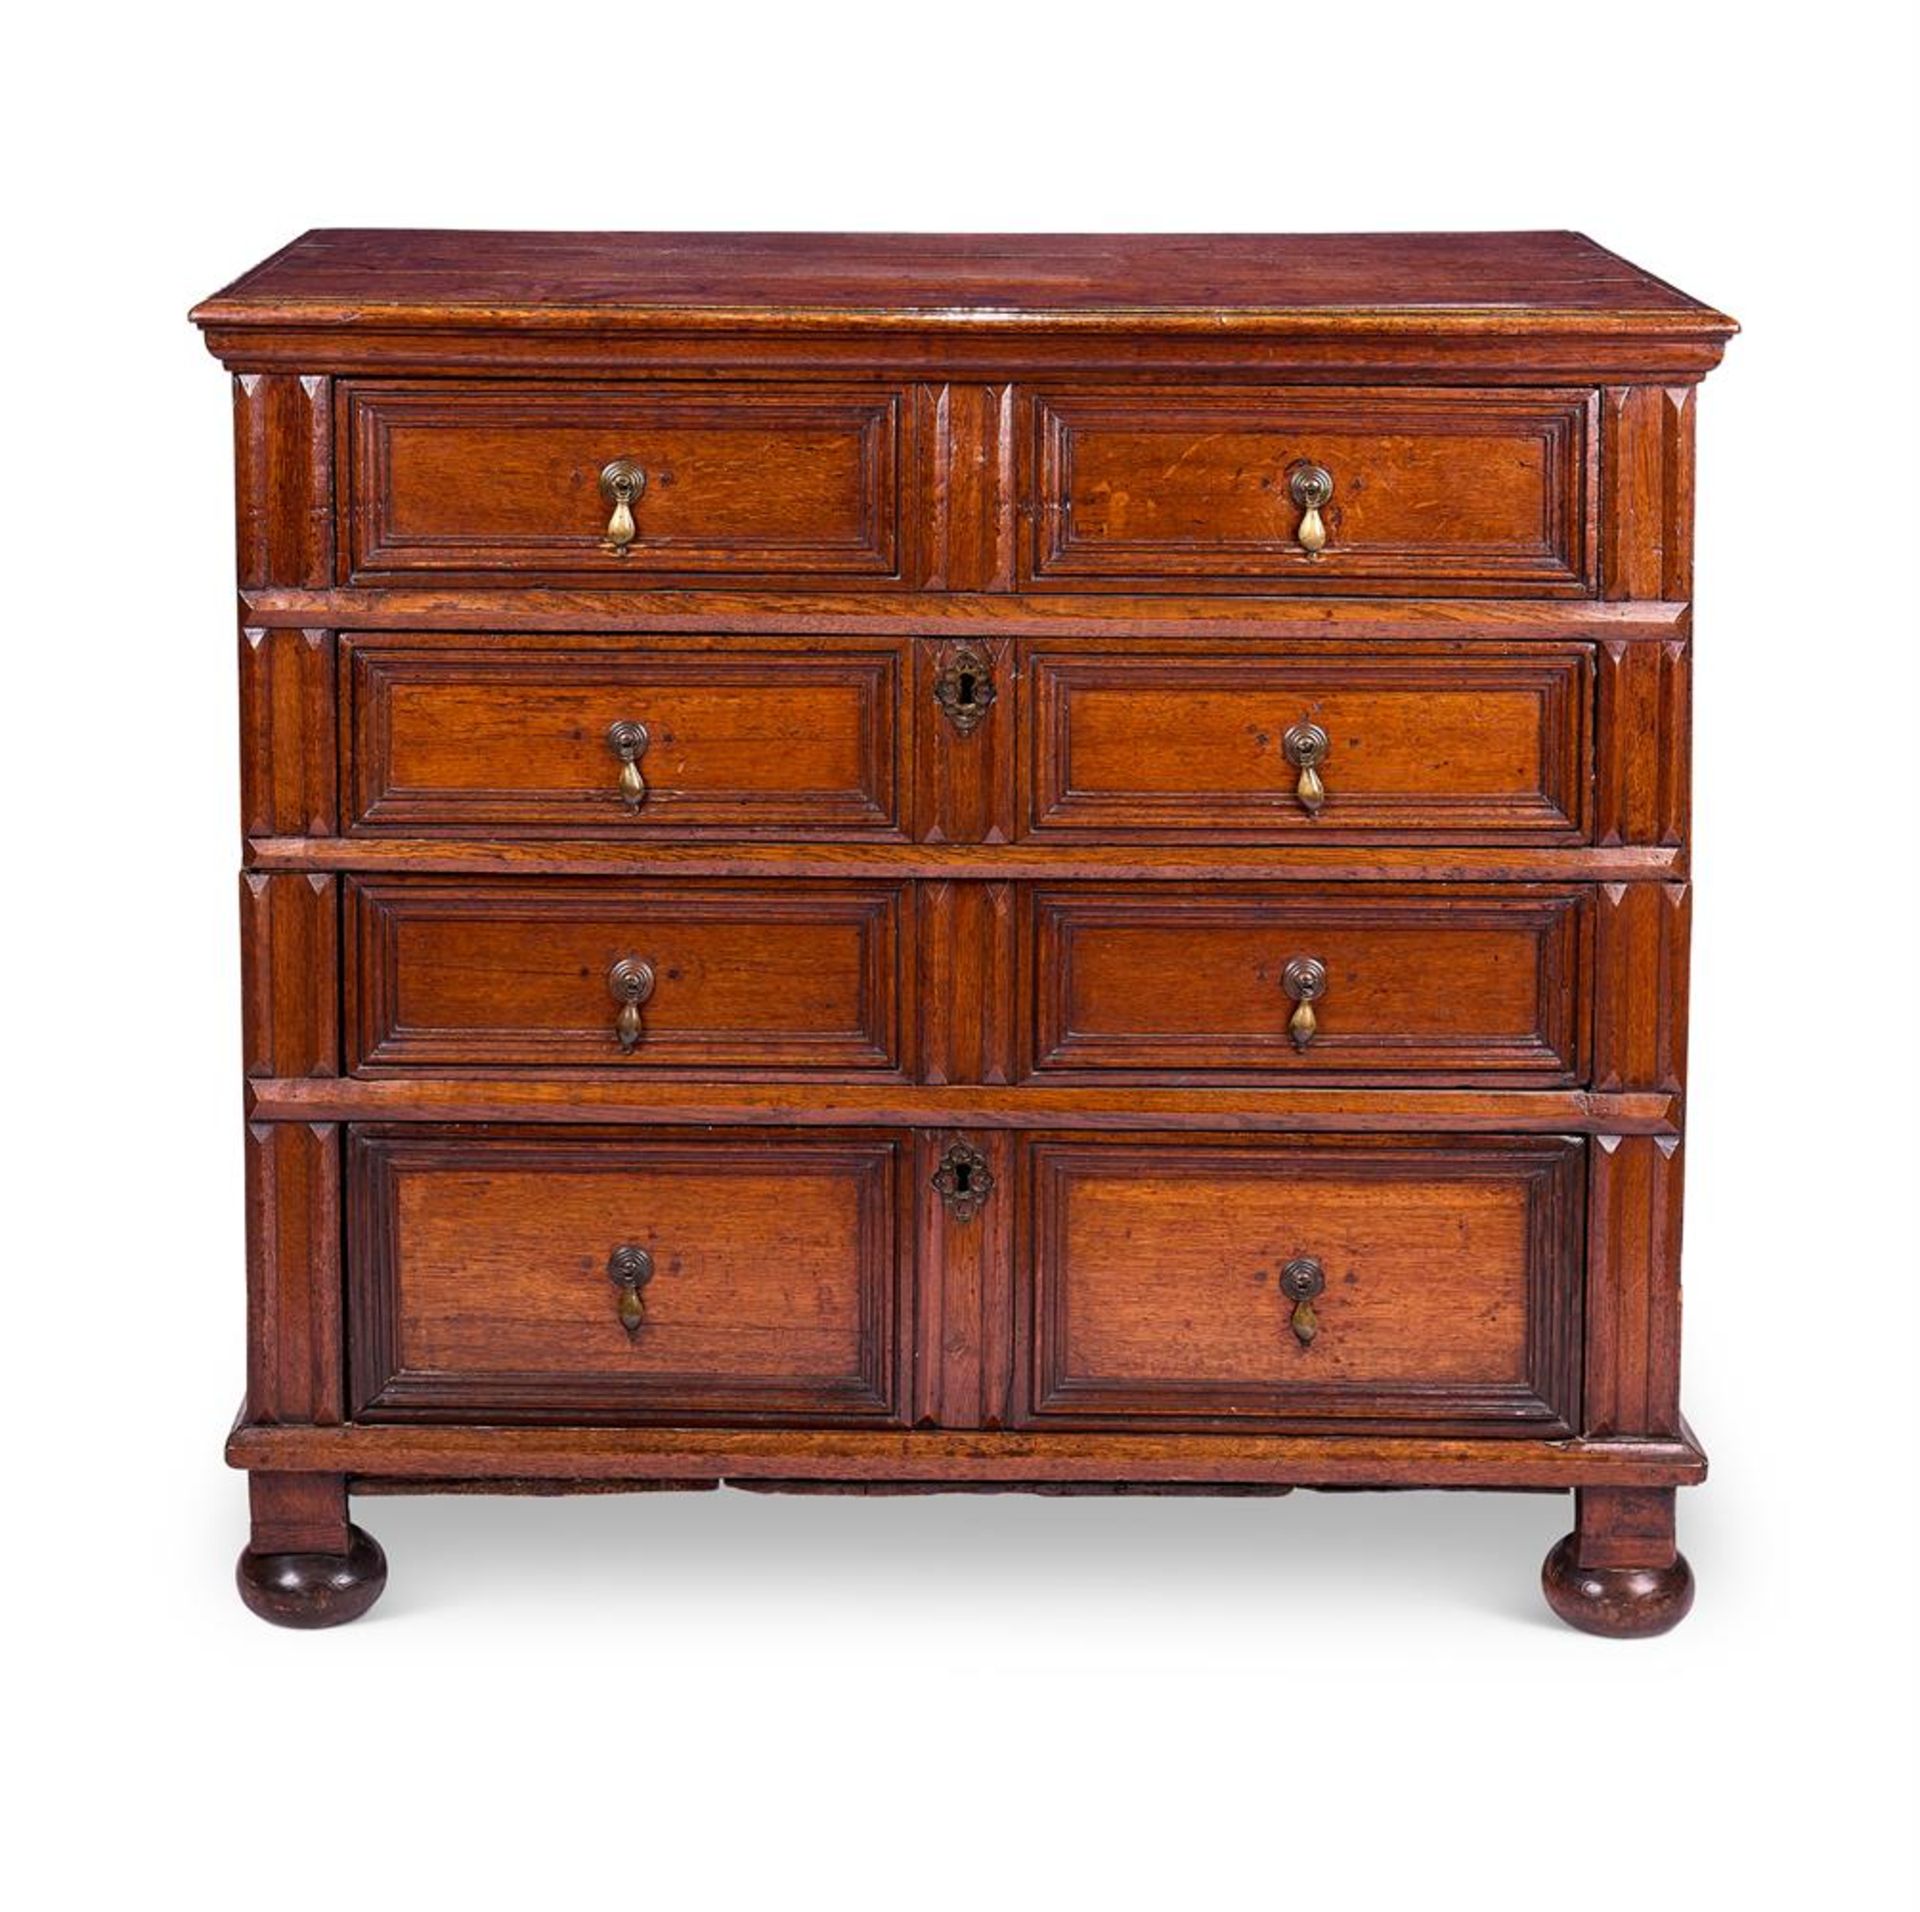 A CHARLES II OAK CHEST MID-17TH CENTURY